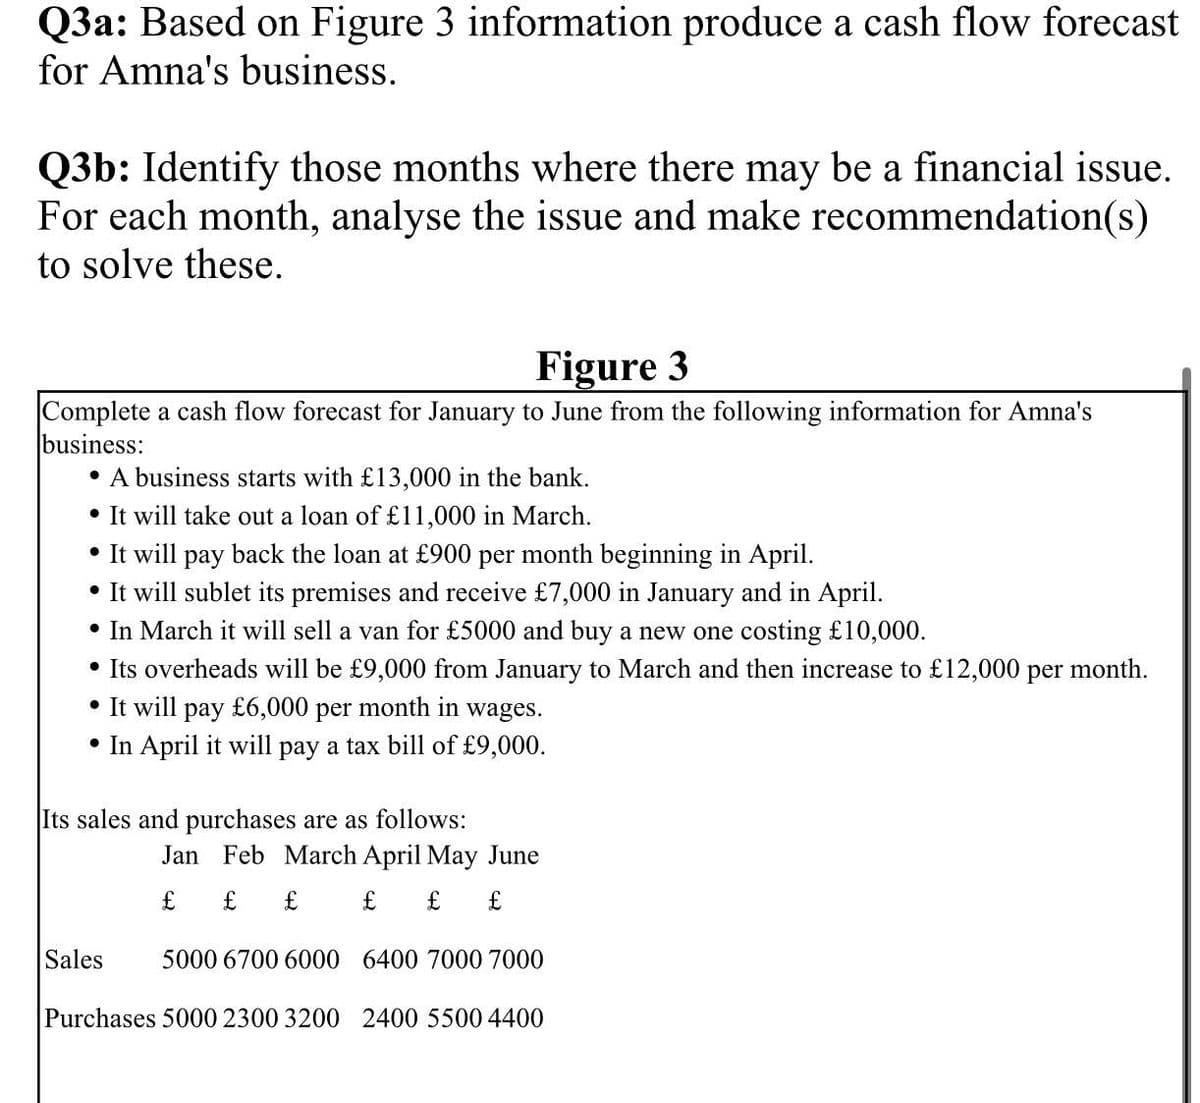 Q3a: Based on Figure 3 information produce a cash flow forecast
for Amna's business.
Q3b: Identify those months where there may be a financial issue.
For each month, analyse the issue and make recommendation(s)
to solve these.
Figure 3
Complete a cash flow forecast for January to June from the following information for Amna's
business:
• A business starts with £13,000 in the bank.
• It will take out a loan of £11,000 in March.
• It will pay back the loan at £900 per month beginning in April.
• It will sublet its premises and receive £7,000 in January and in April.
• In March it will sell a van for £5000 and buy a new one costing £10,000.
• Its overheads will be £9,000 from January to March and then increase to £12,000 per month.
• It will pay £6,000 per month in wages.
• In April it will pay a tax bill of £9,000.
Its sales and purchases are as follows:
Jan Feb March April May June
£ £ £ £ £
Sales
£
5000 6700 6000 6400 7000 7000
Purchases 5000 2300 3200 2400 5500 4400